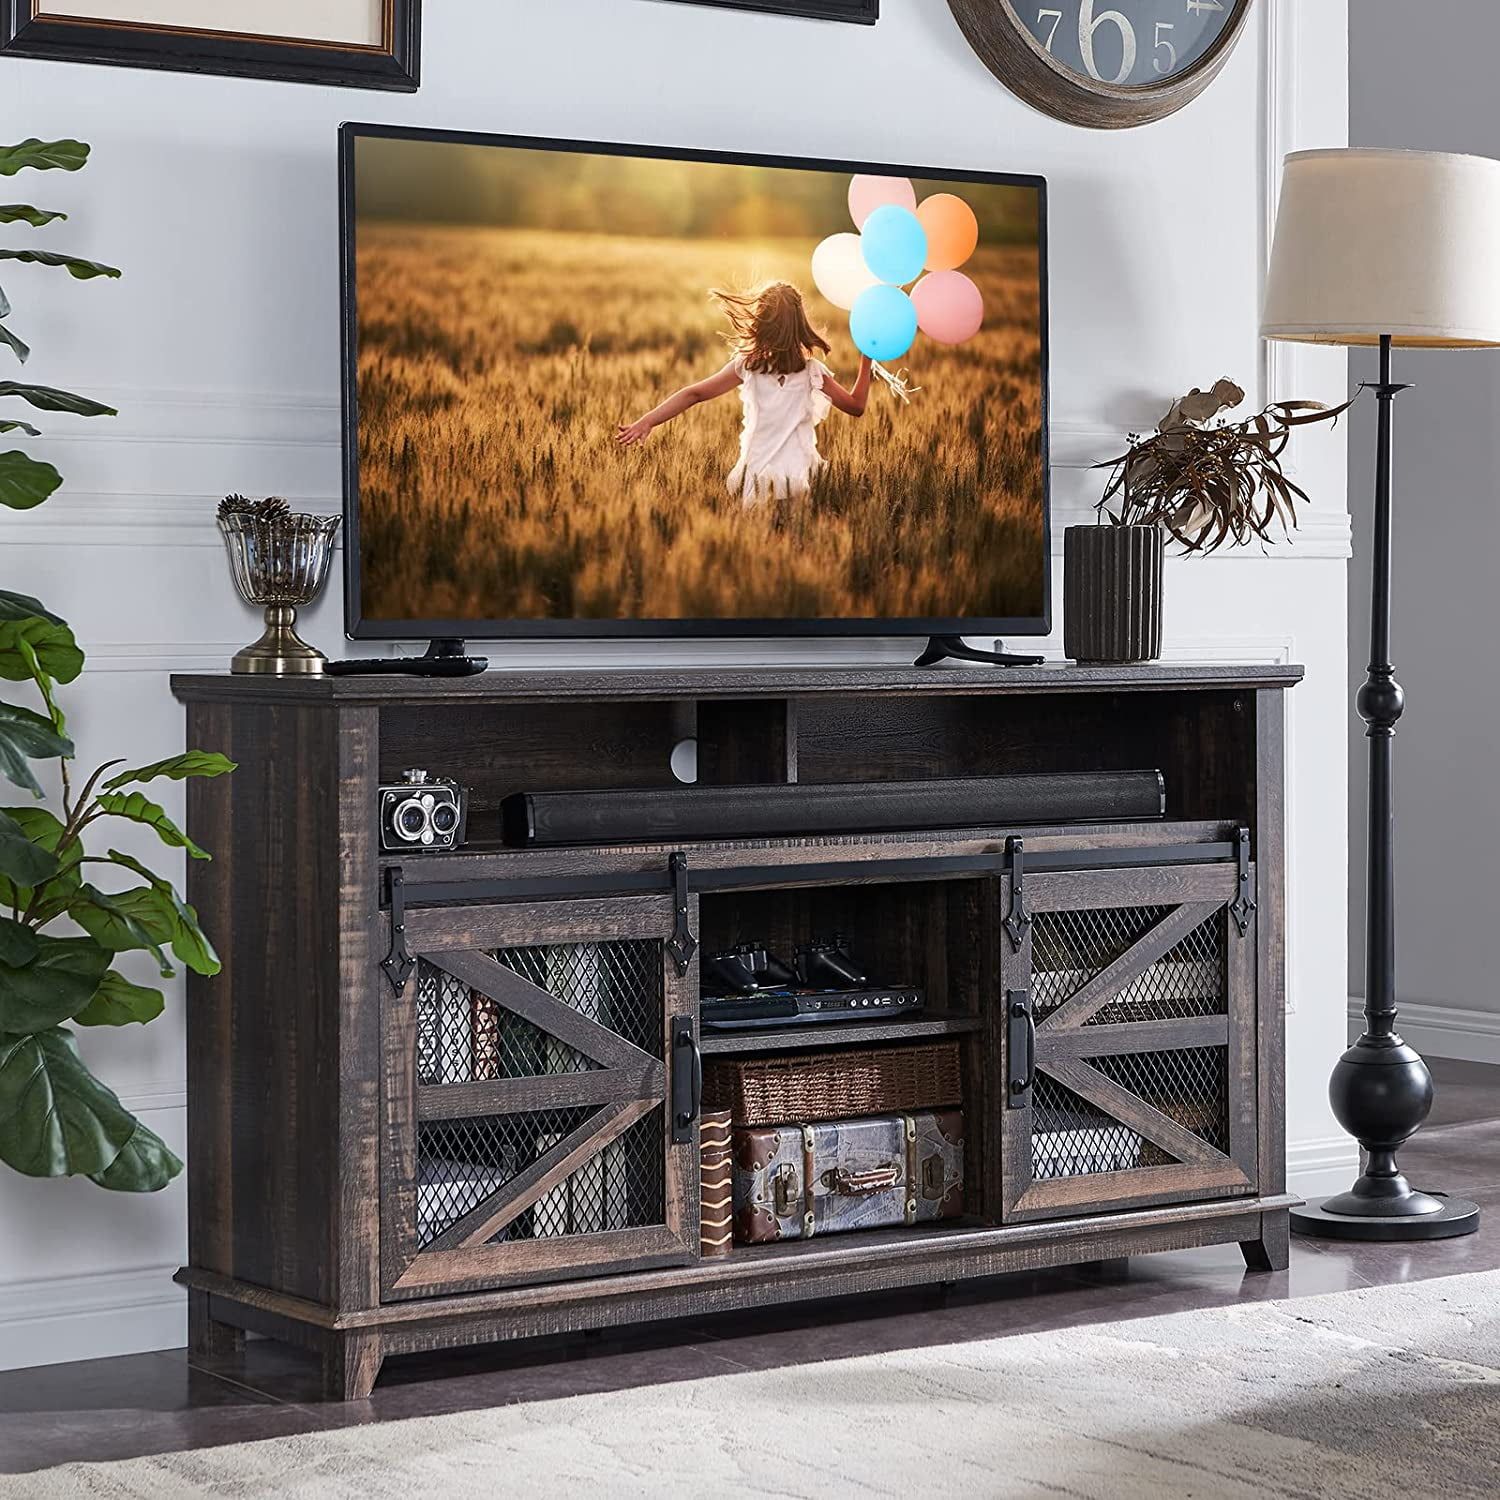 Okd Farmhouse Tv Stand With Sliding Barn Door For 65+ Inch Tv, Wood Metal  Entertainment Center With Shelves, Dark Rustic Oak – Walmart Within Farmhouse Stands With Shelves (View 12 of 15)